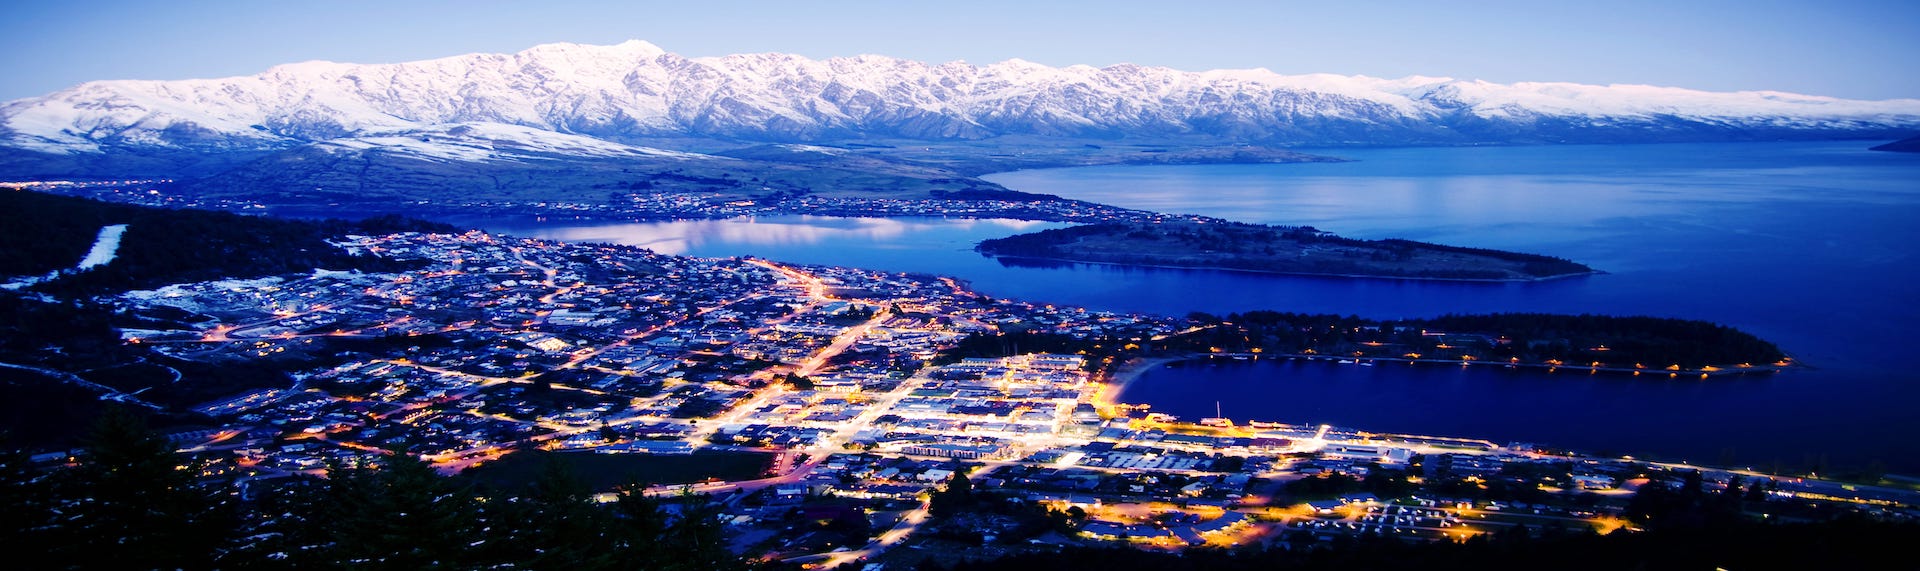 View of Queenstown New Zealand at night time during winter